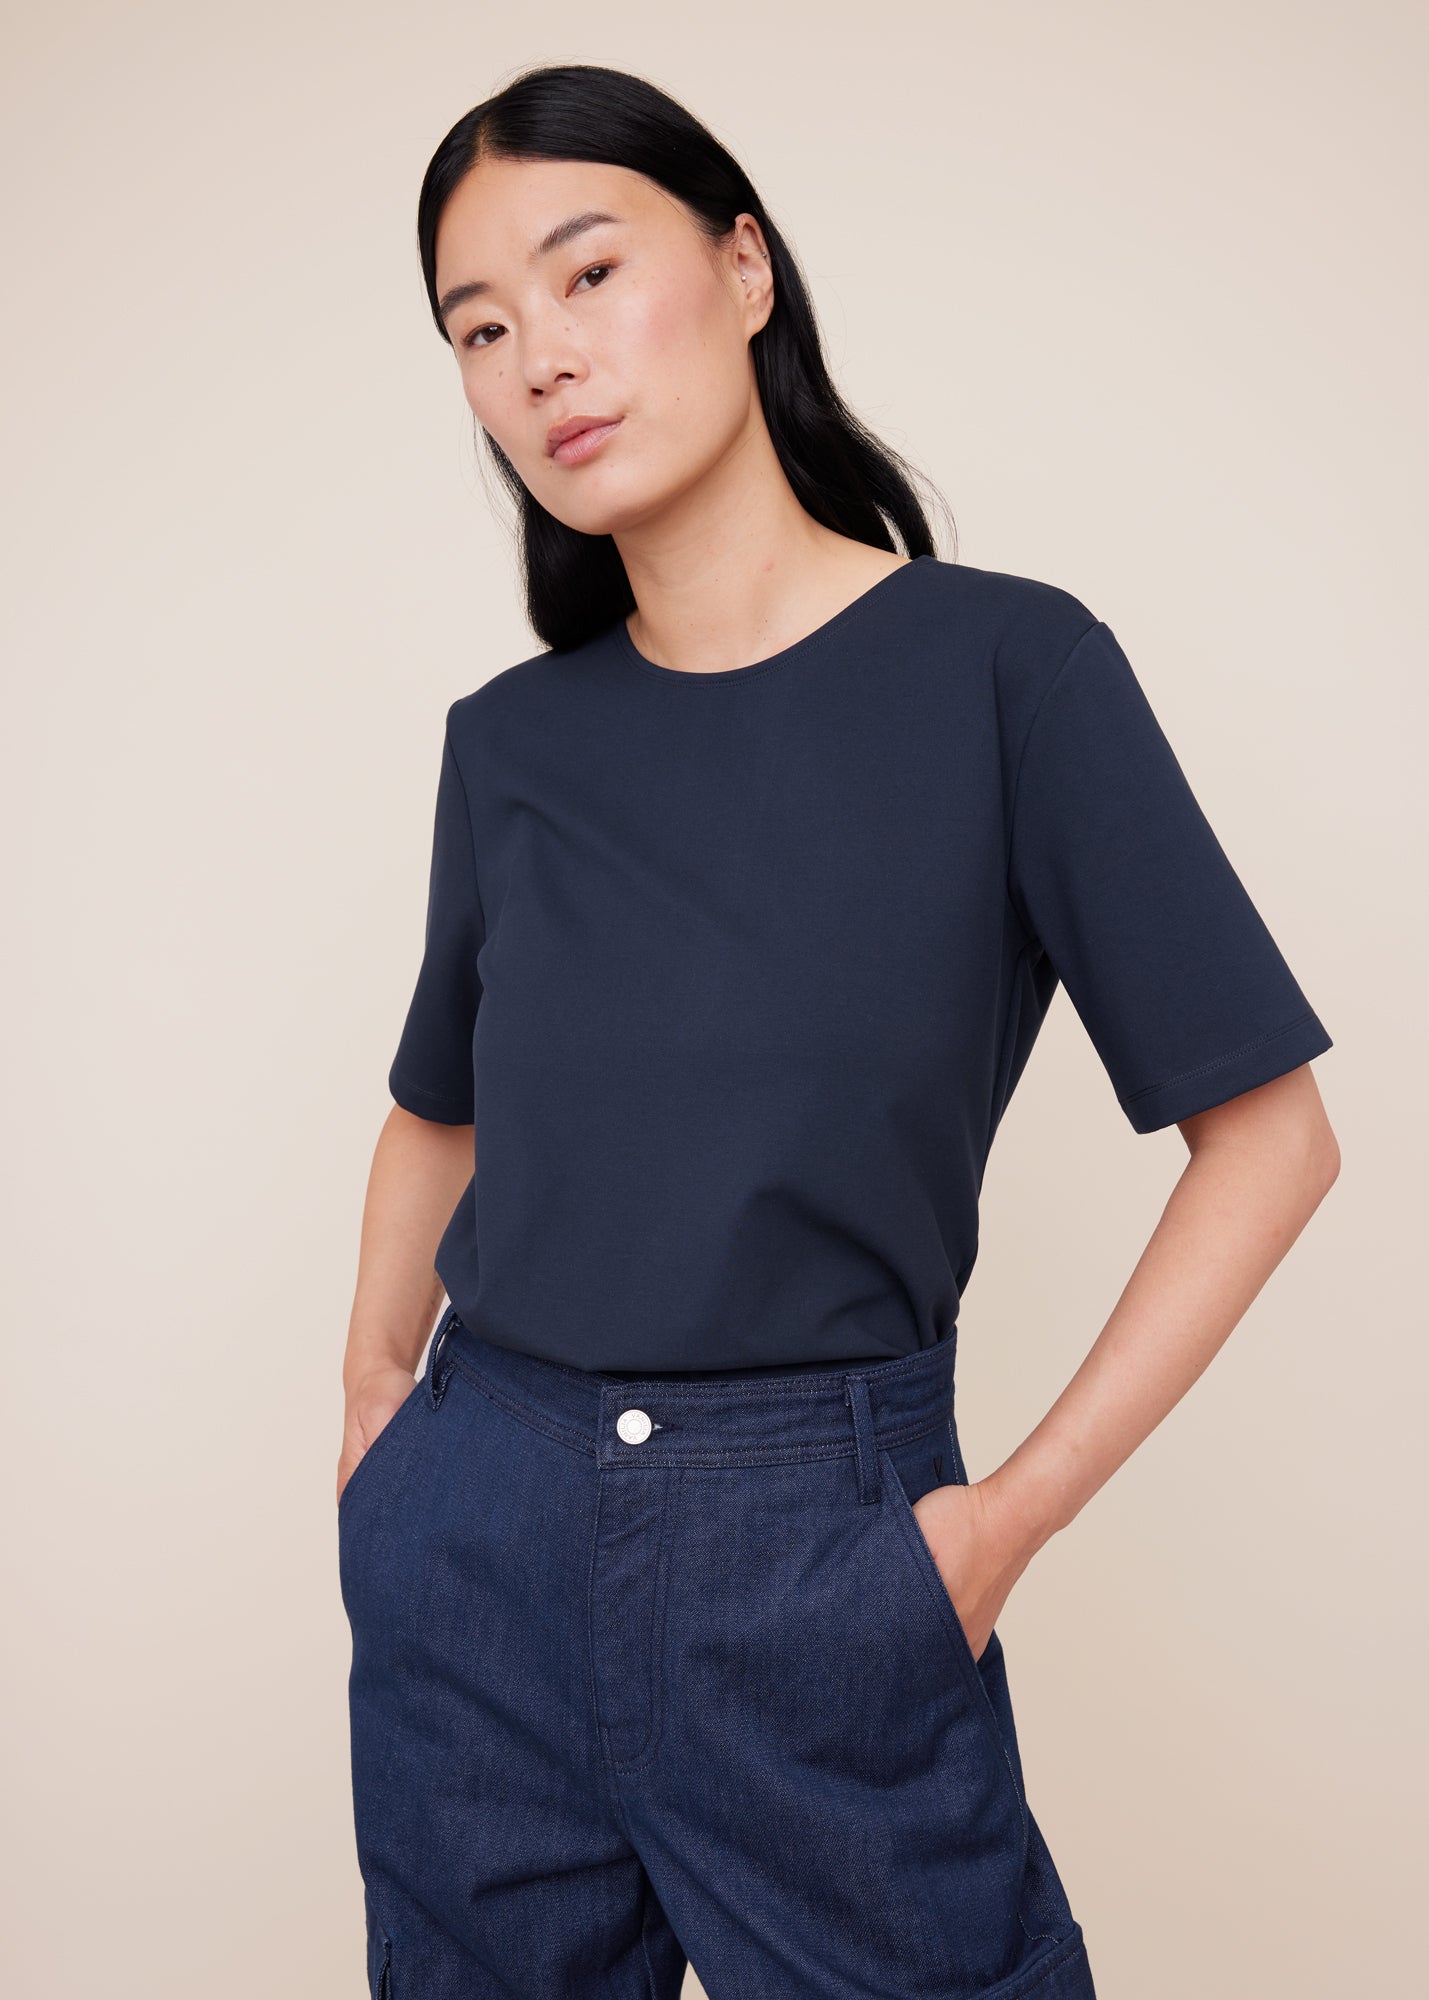 Cotton top with a rounded neckline